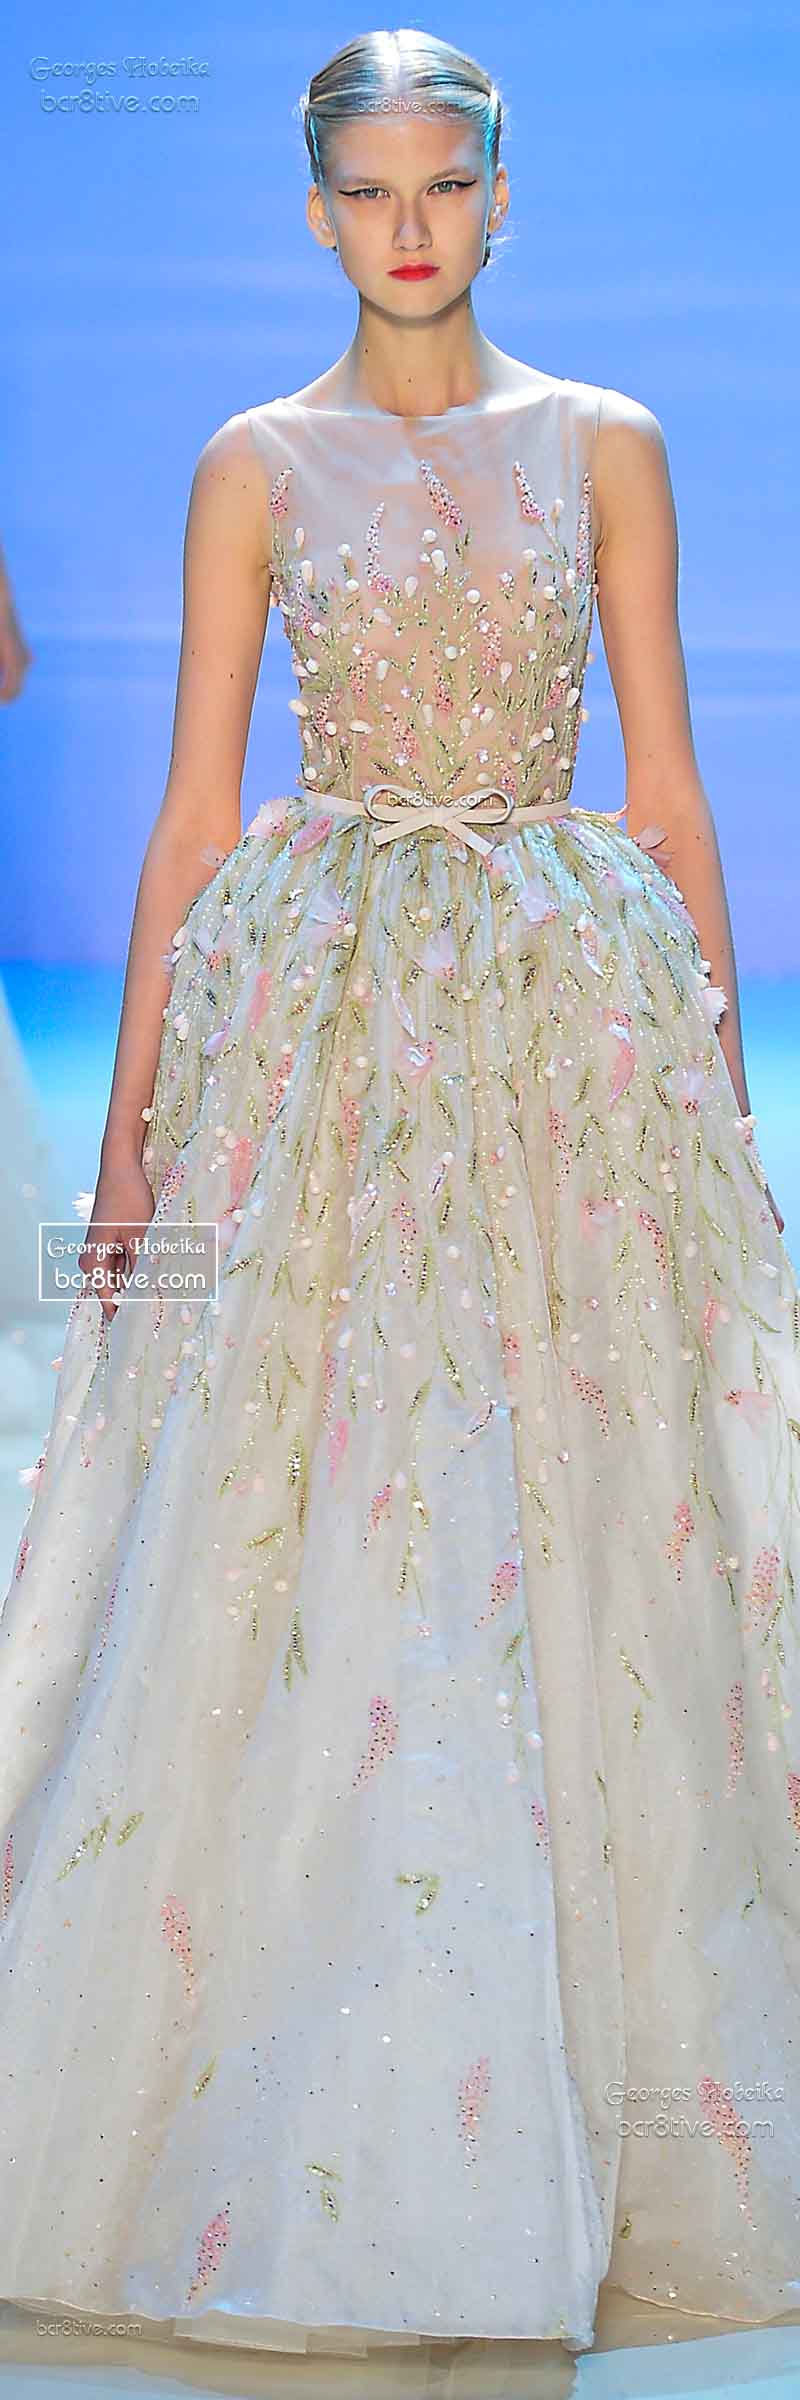 Monet’s Midnight Stroll by Georges Hobeika – Be Creative